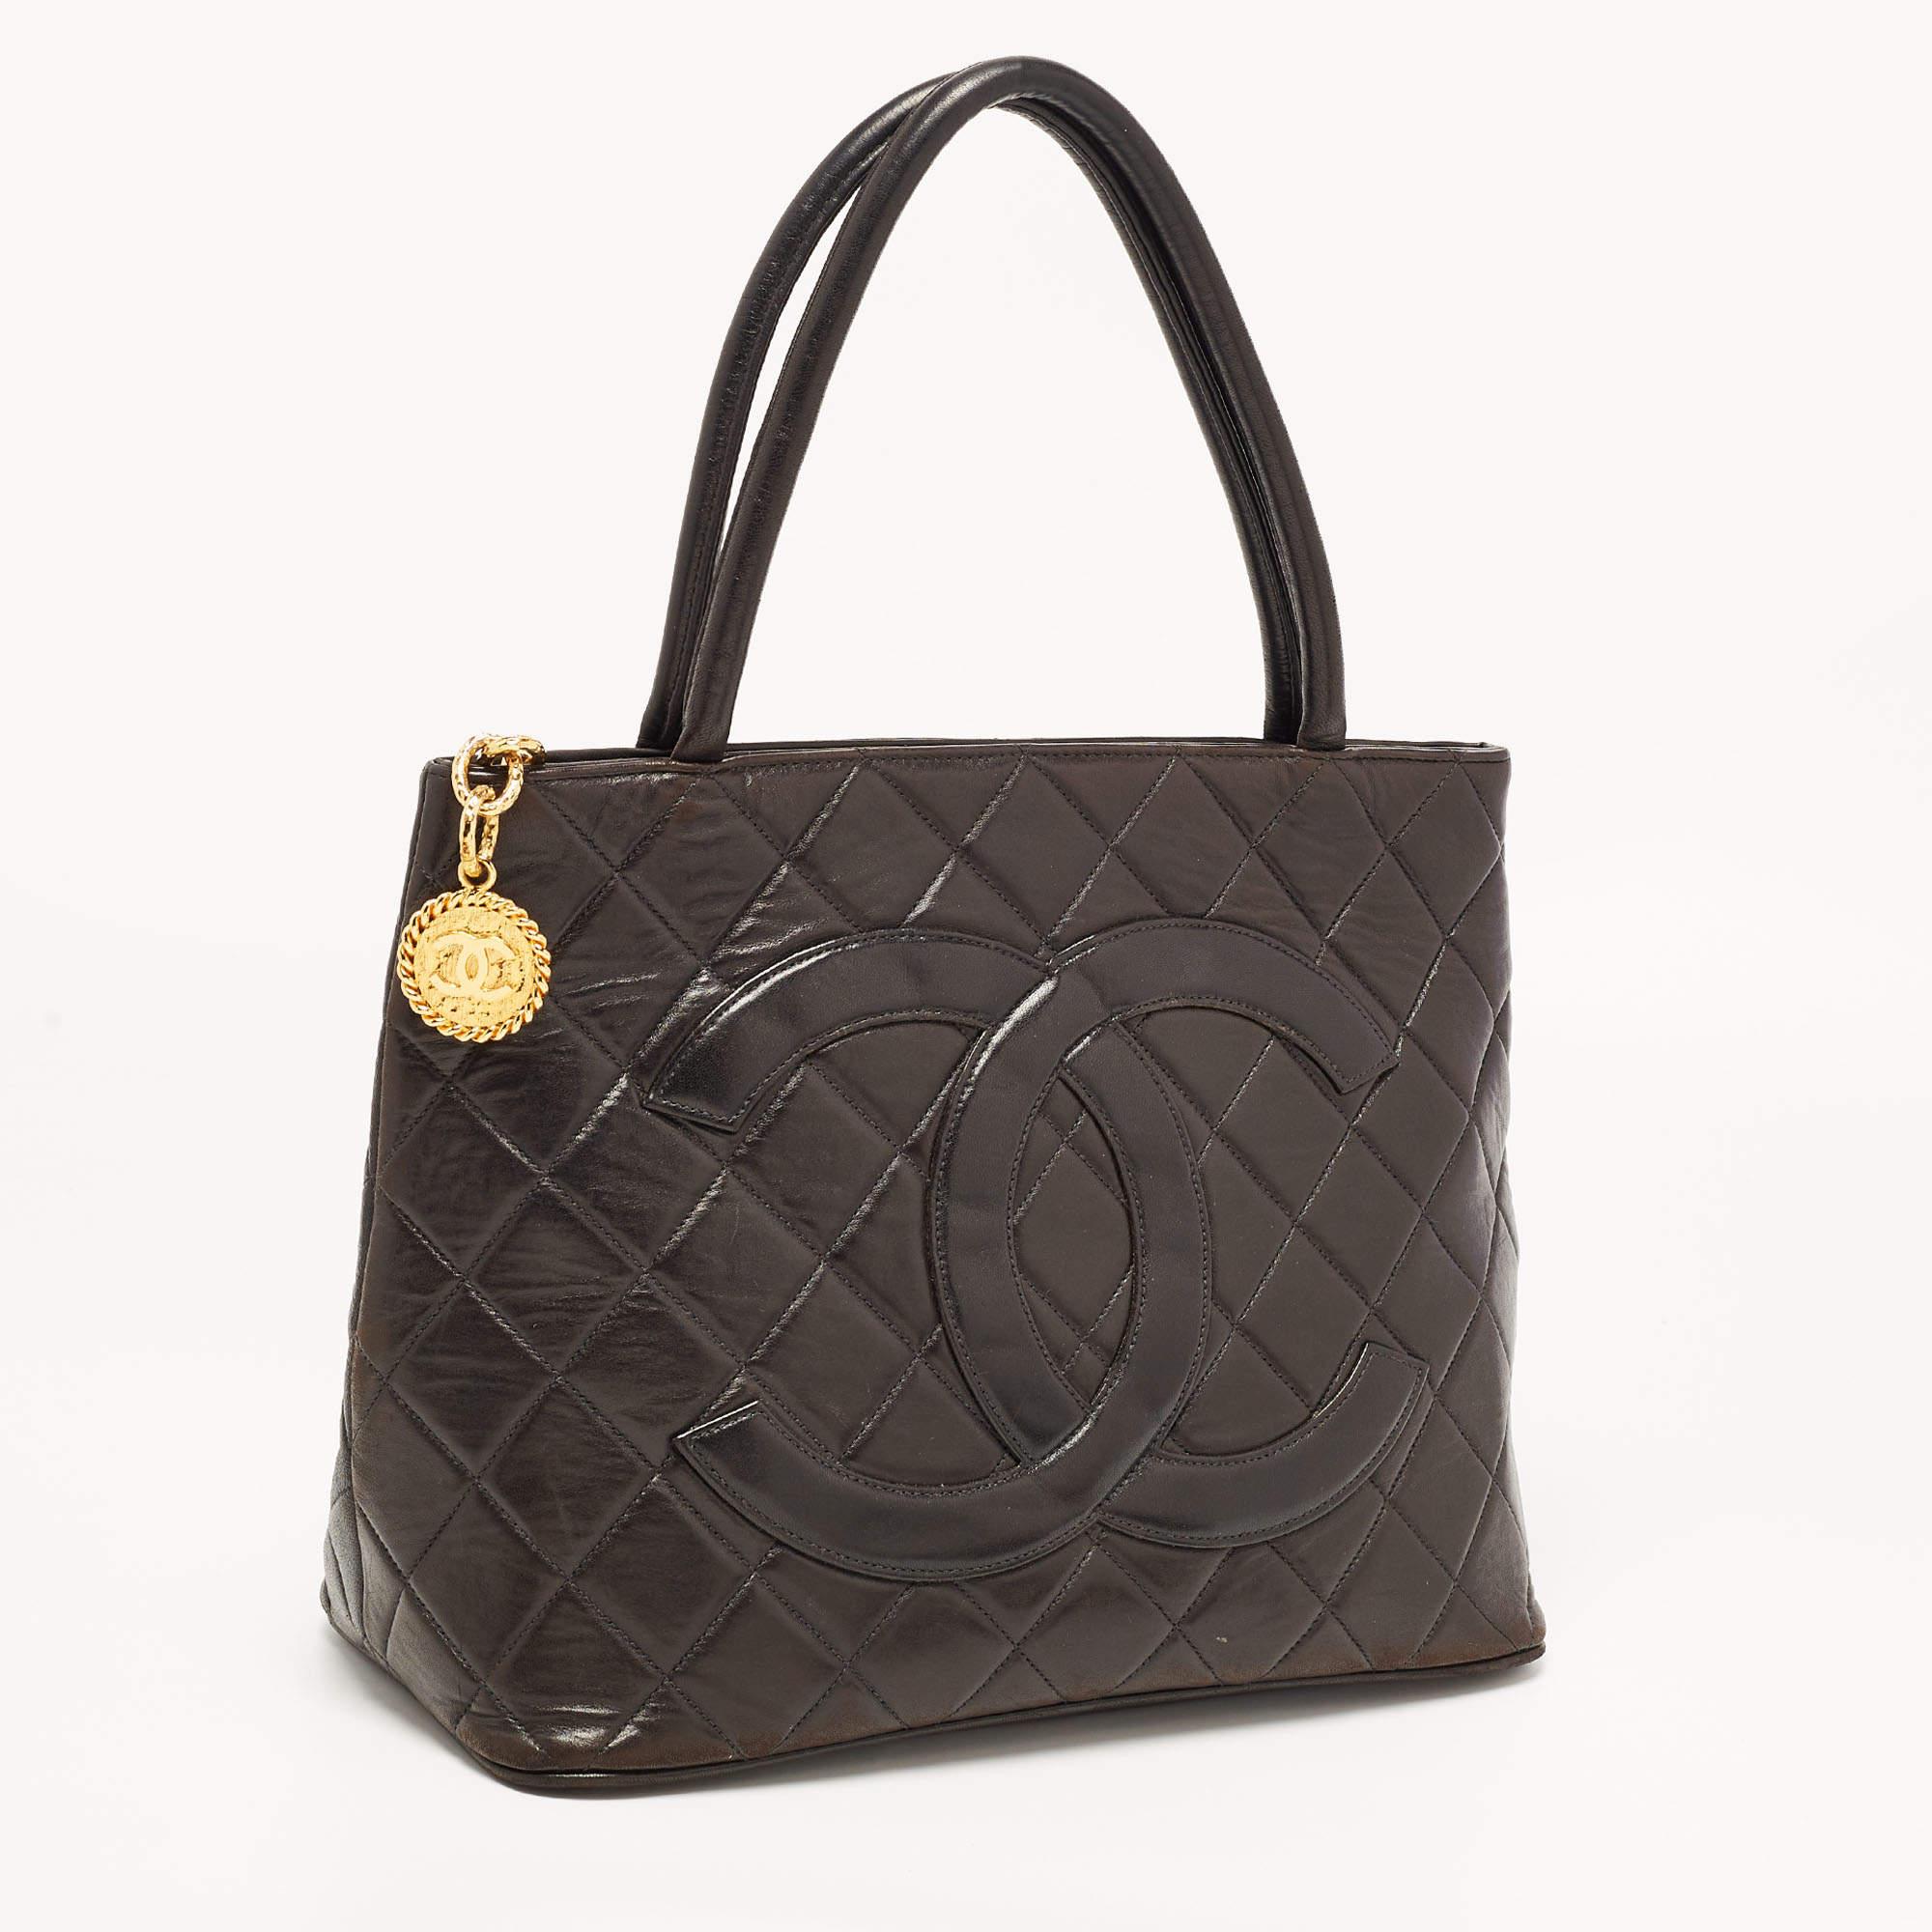 Women's Chanel Black Quilted Leather Medallion Tote